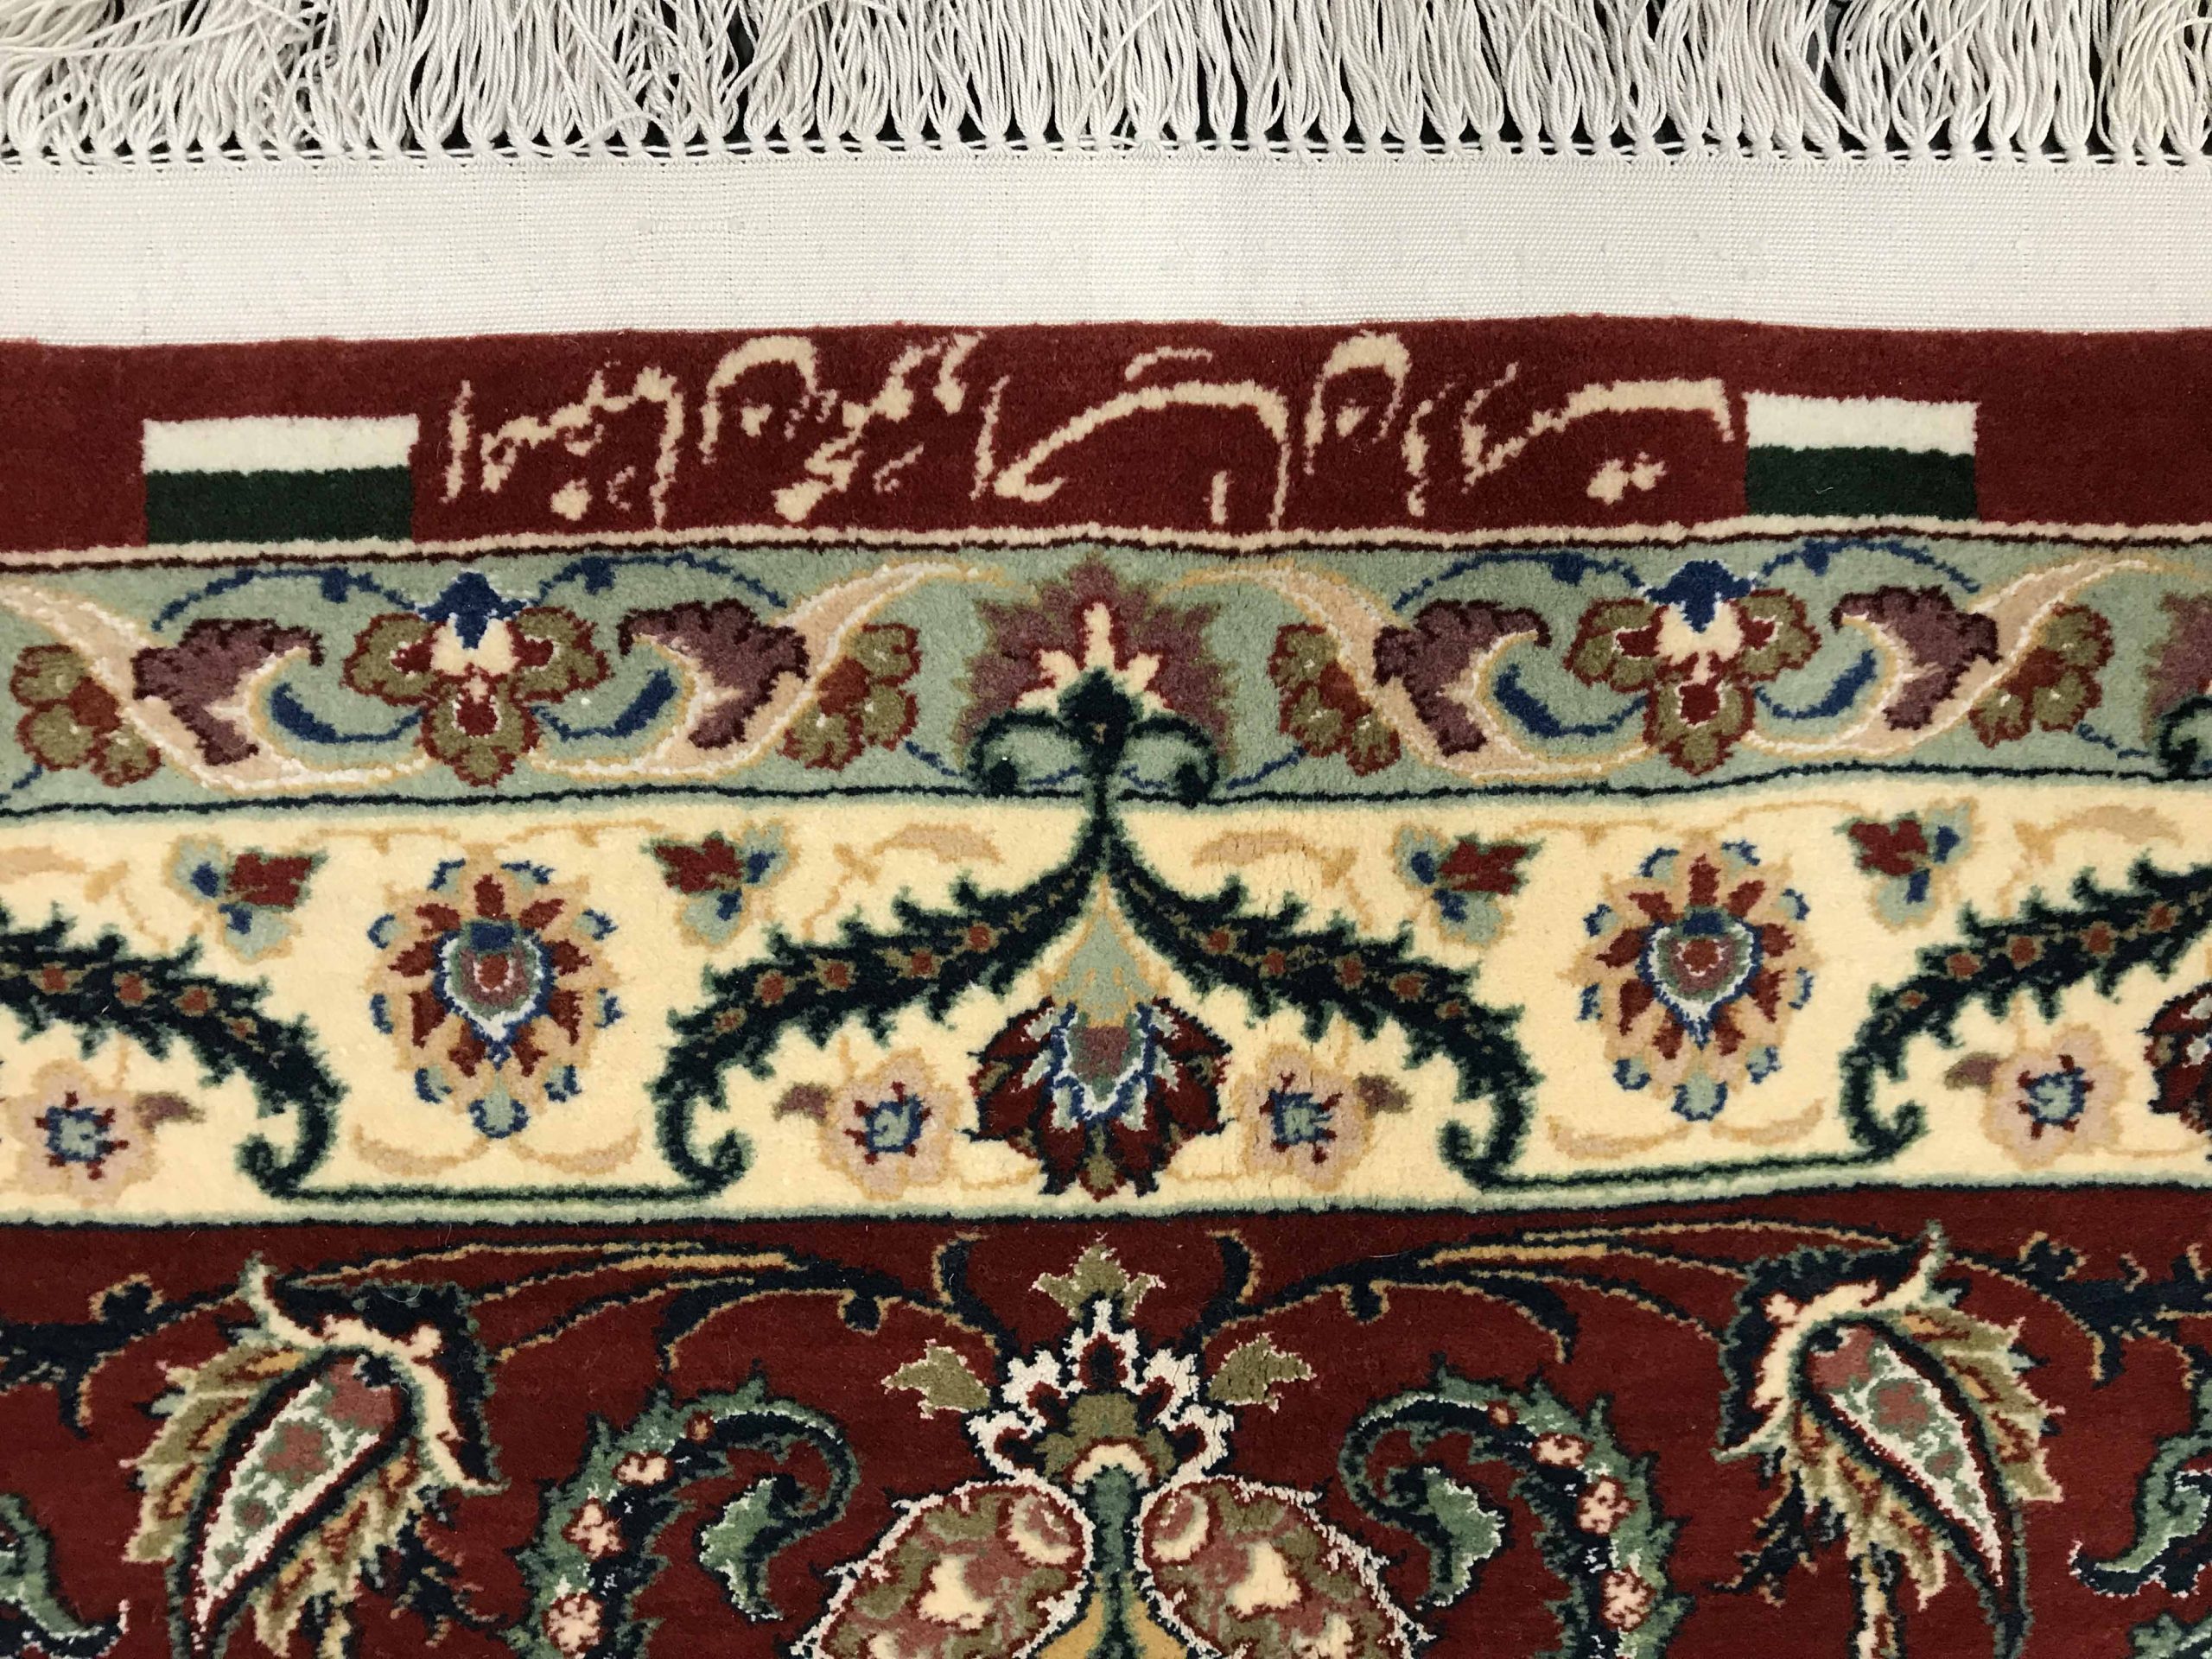 #4490 Superfine silk based and inlay Persian Isfehan, signed Mahmood Ehsan-Doost , natural vegetable dyes, collectable, circa 1990, size 424x309 cm (4)